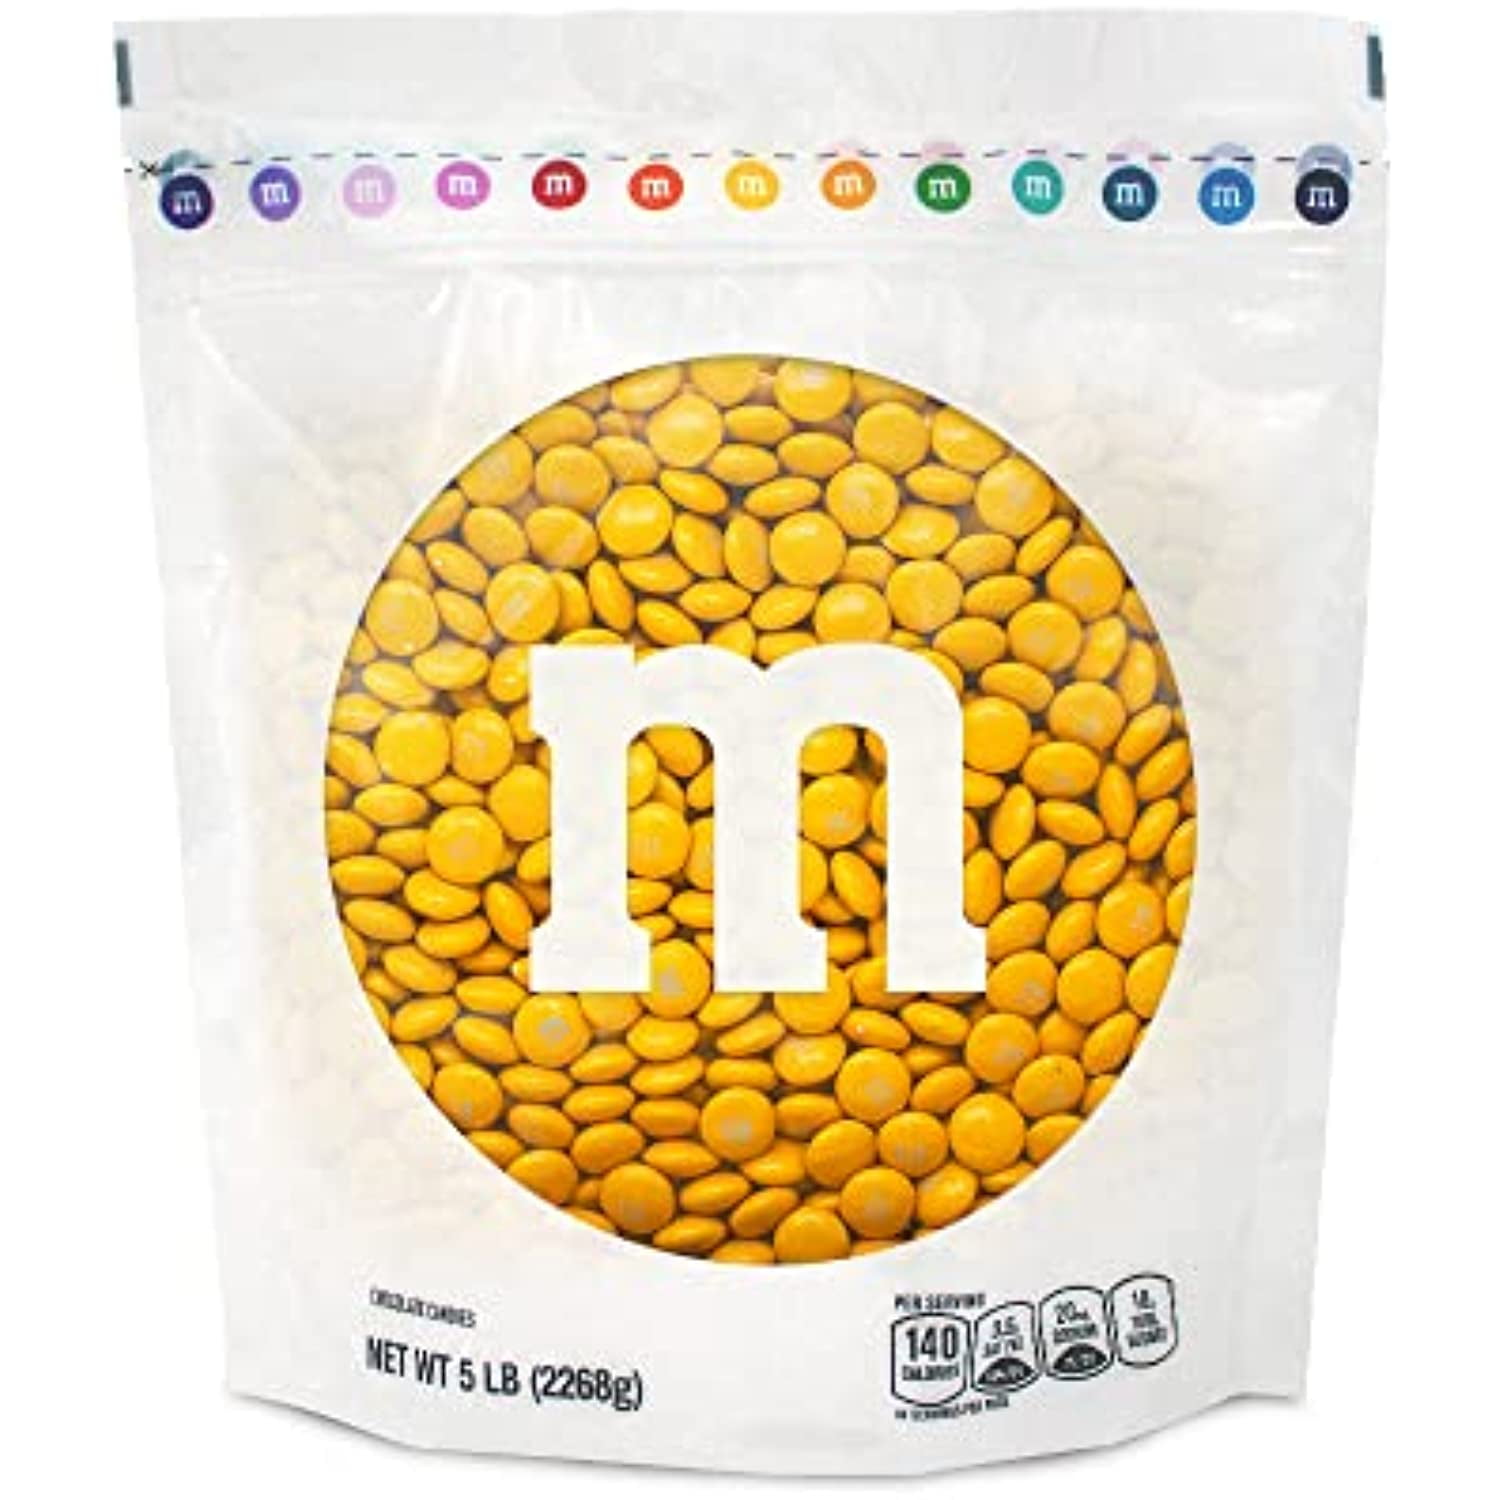 M&M's Milk Chocolate Meant to Bee Candy, 5lbs of Bulk Candy for Engagement Party, Bridal Shower, Wedding Gifts, Wedding Favors and Candy Buffet